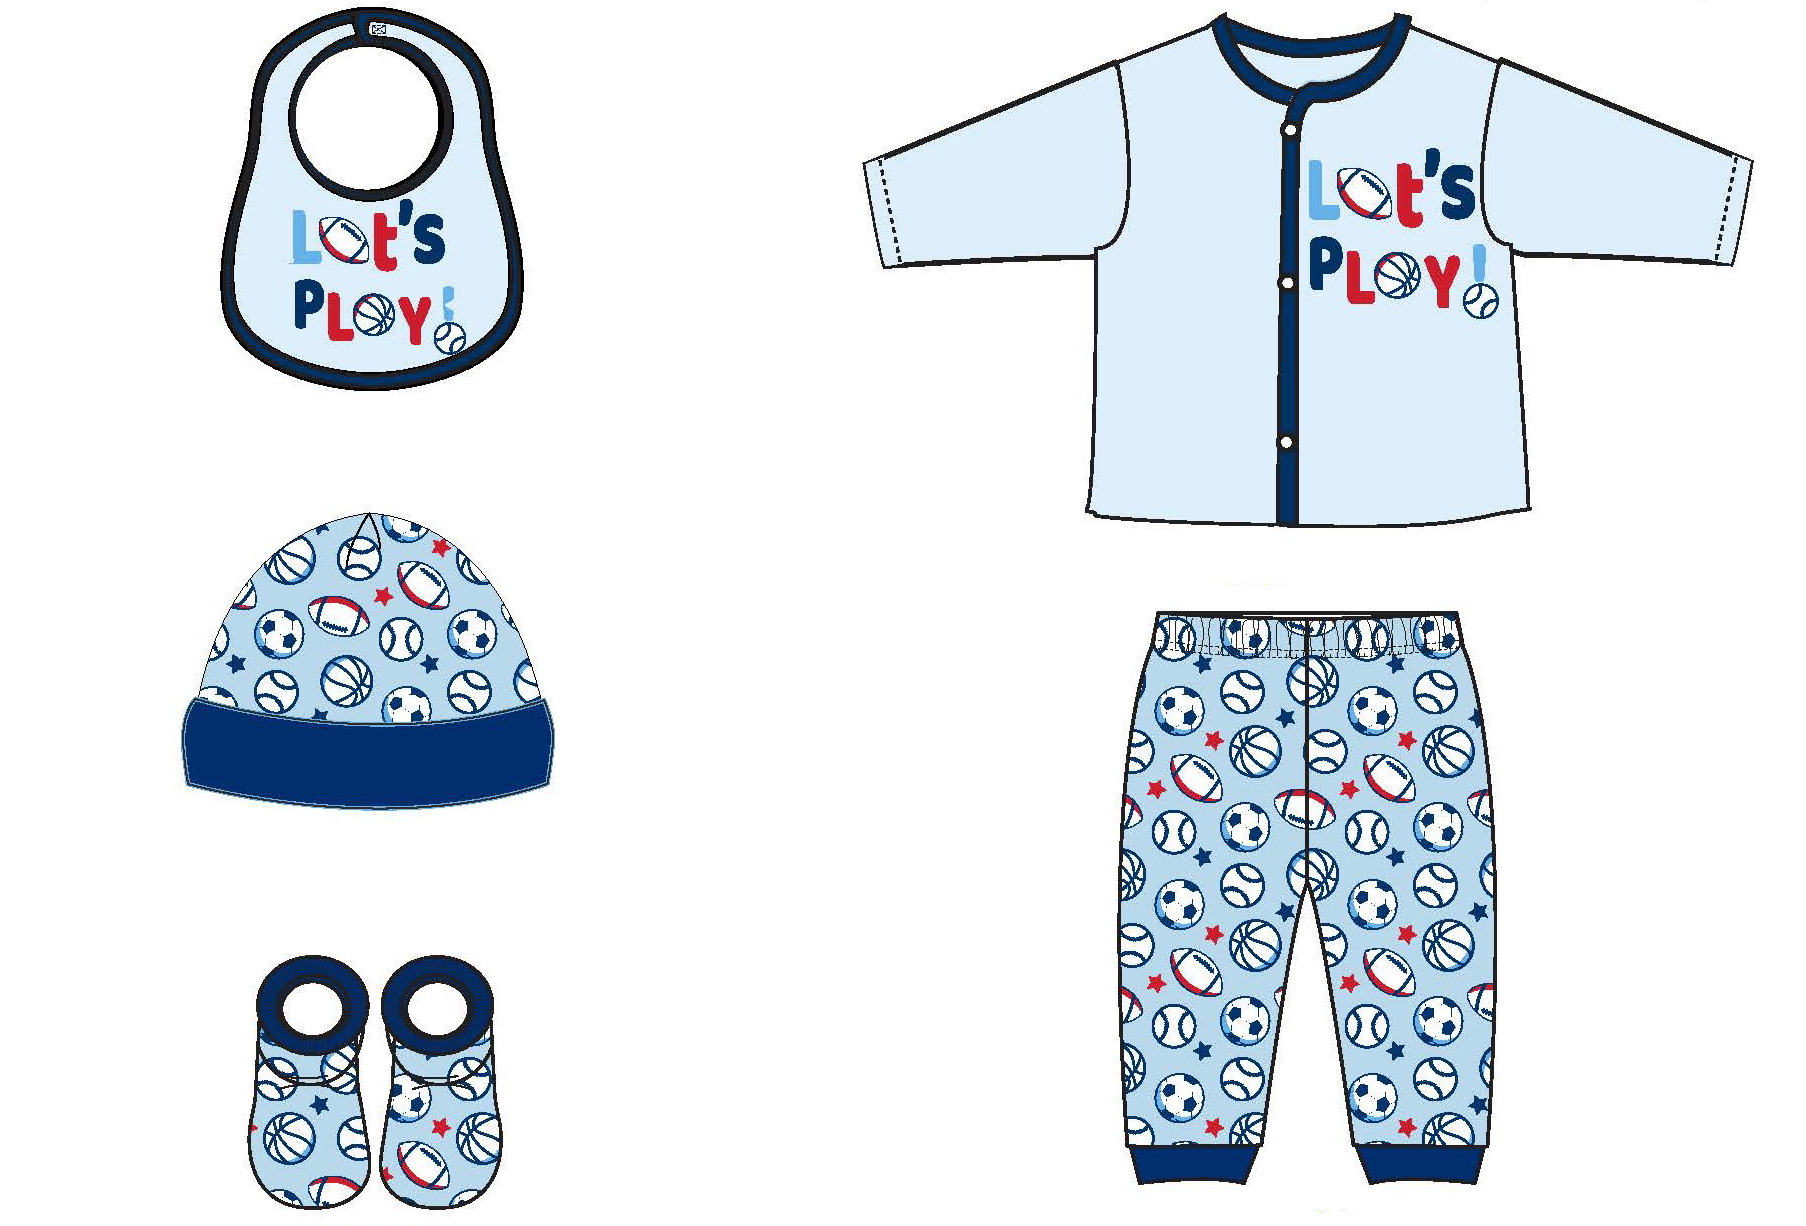 5 PC. Baby Boy's Printed Cardigan & Apparel Sets w/ Let's Play Sports Print